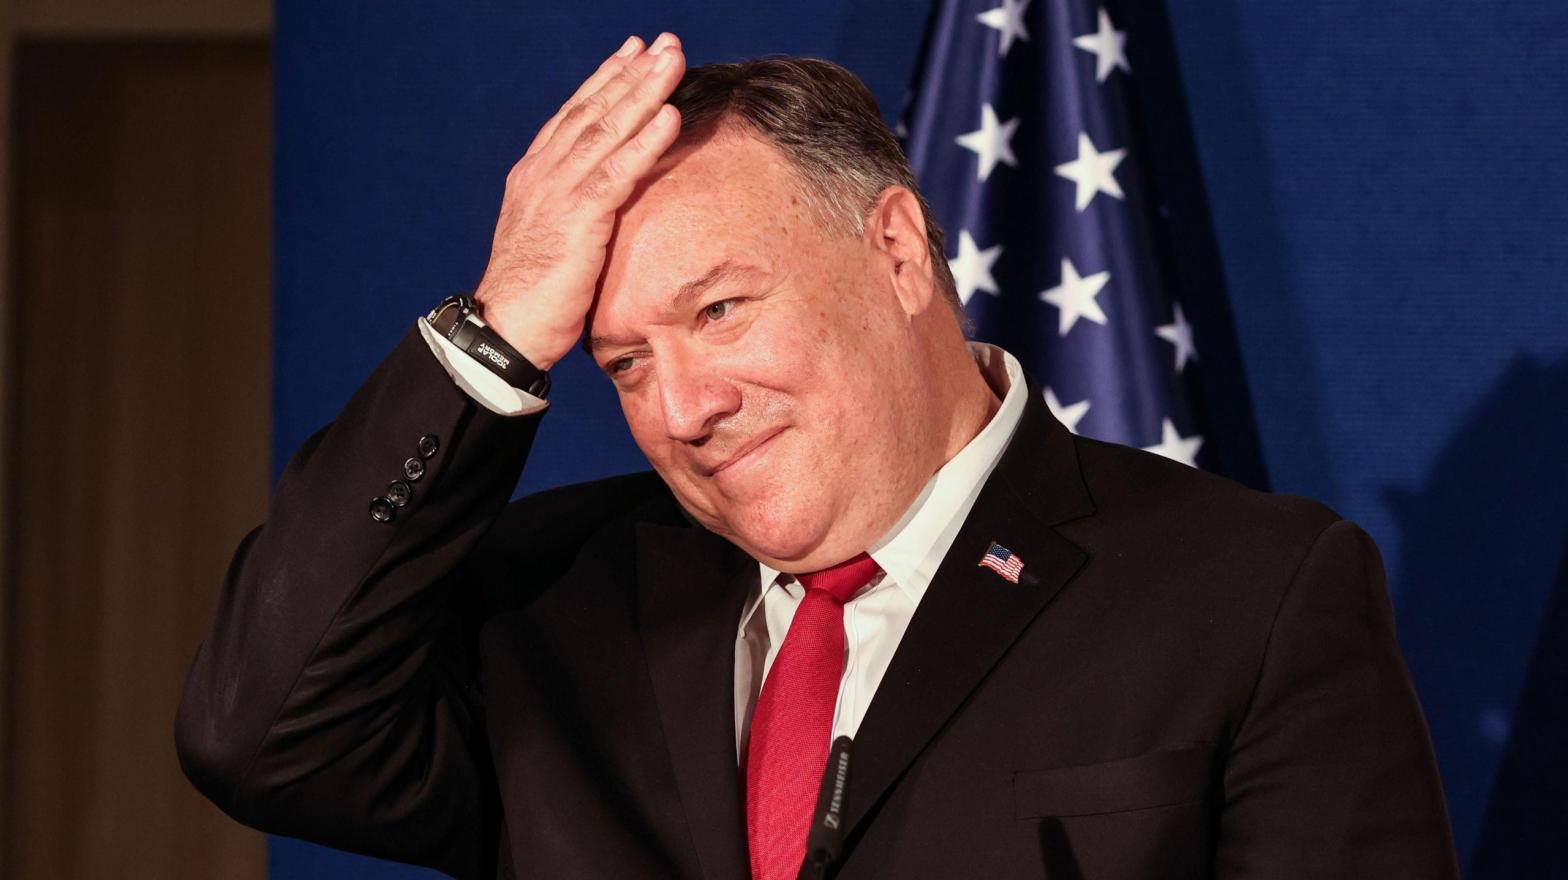 Former U.S. Secretary of State Mike Pompeo at a press conference with the Israeli Prime Minister and Bahrain's Foreign Minister in Jerusalem on November 18, 2020. (Photo: Menahem Kahana, Getty Images)